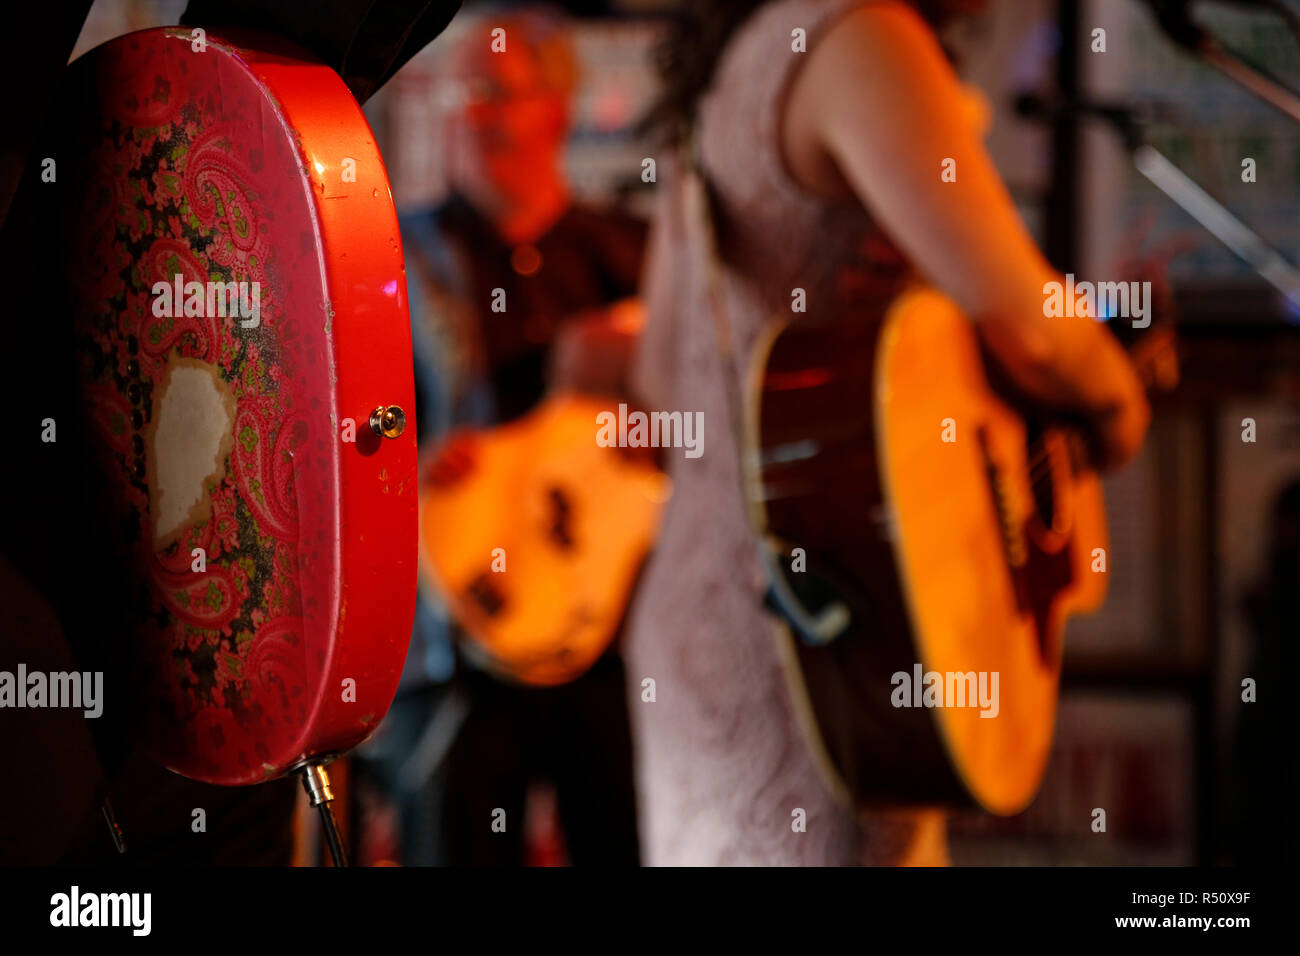 Mid section shot of band playing music in bar, Nashville, Tennessee, USA Stock Photo